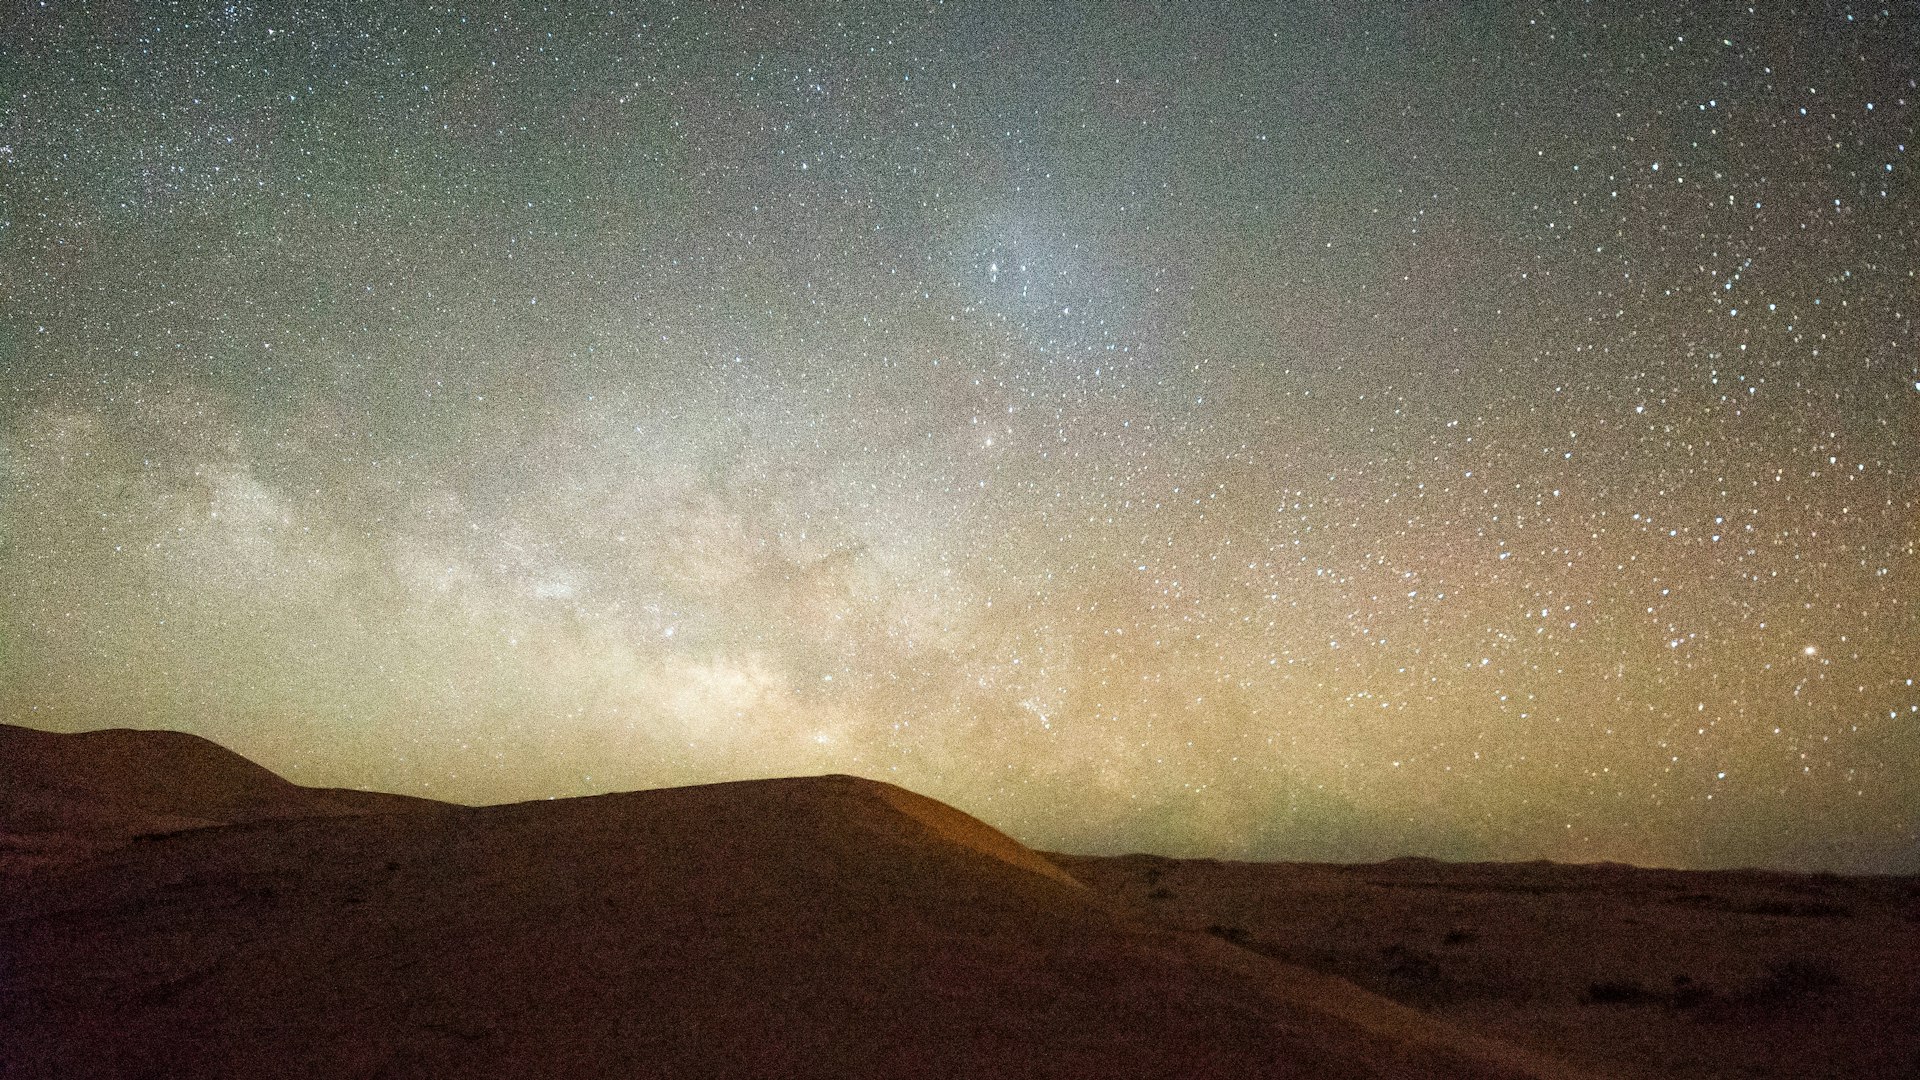 A desert sky at night, filled with stars 